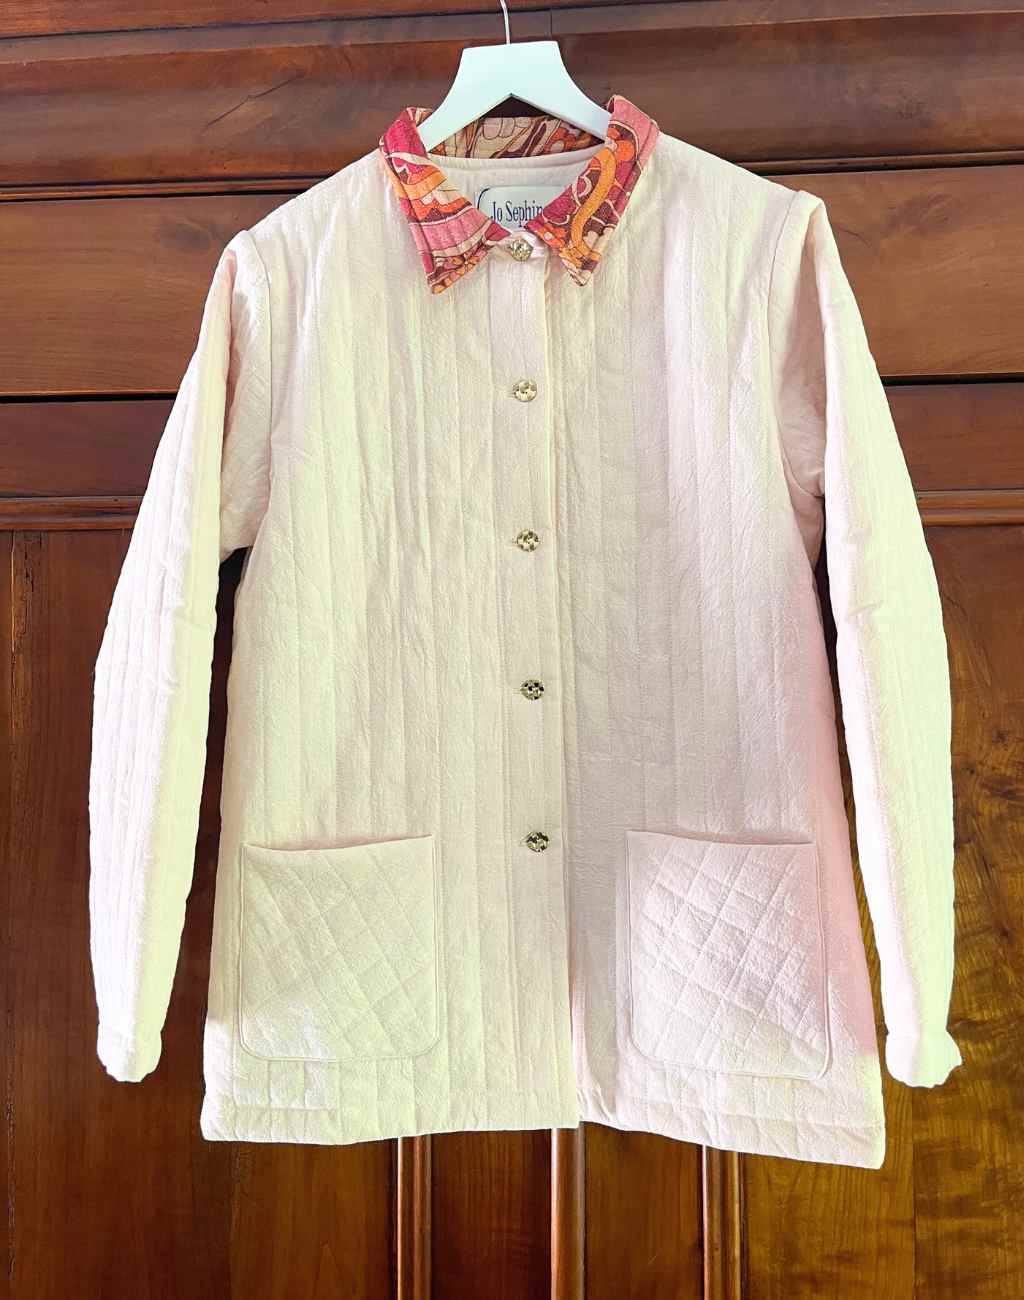 Pale Pink Quilted Jacket with Gold Buttons and 1970's esque Paisley Print Collar - Visit Nifty JoSephine 